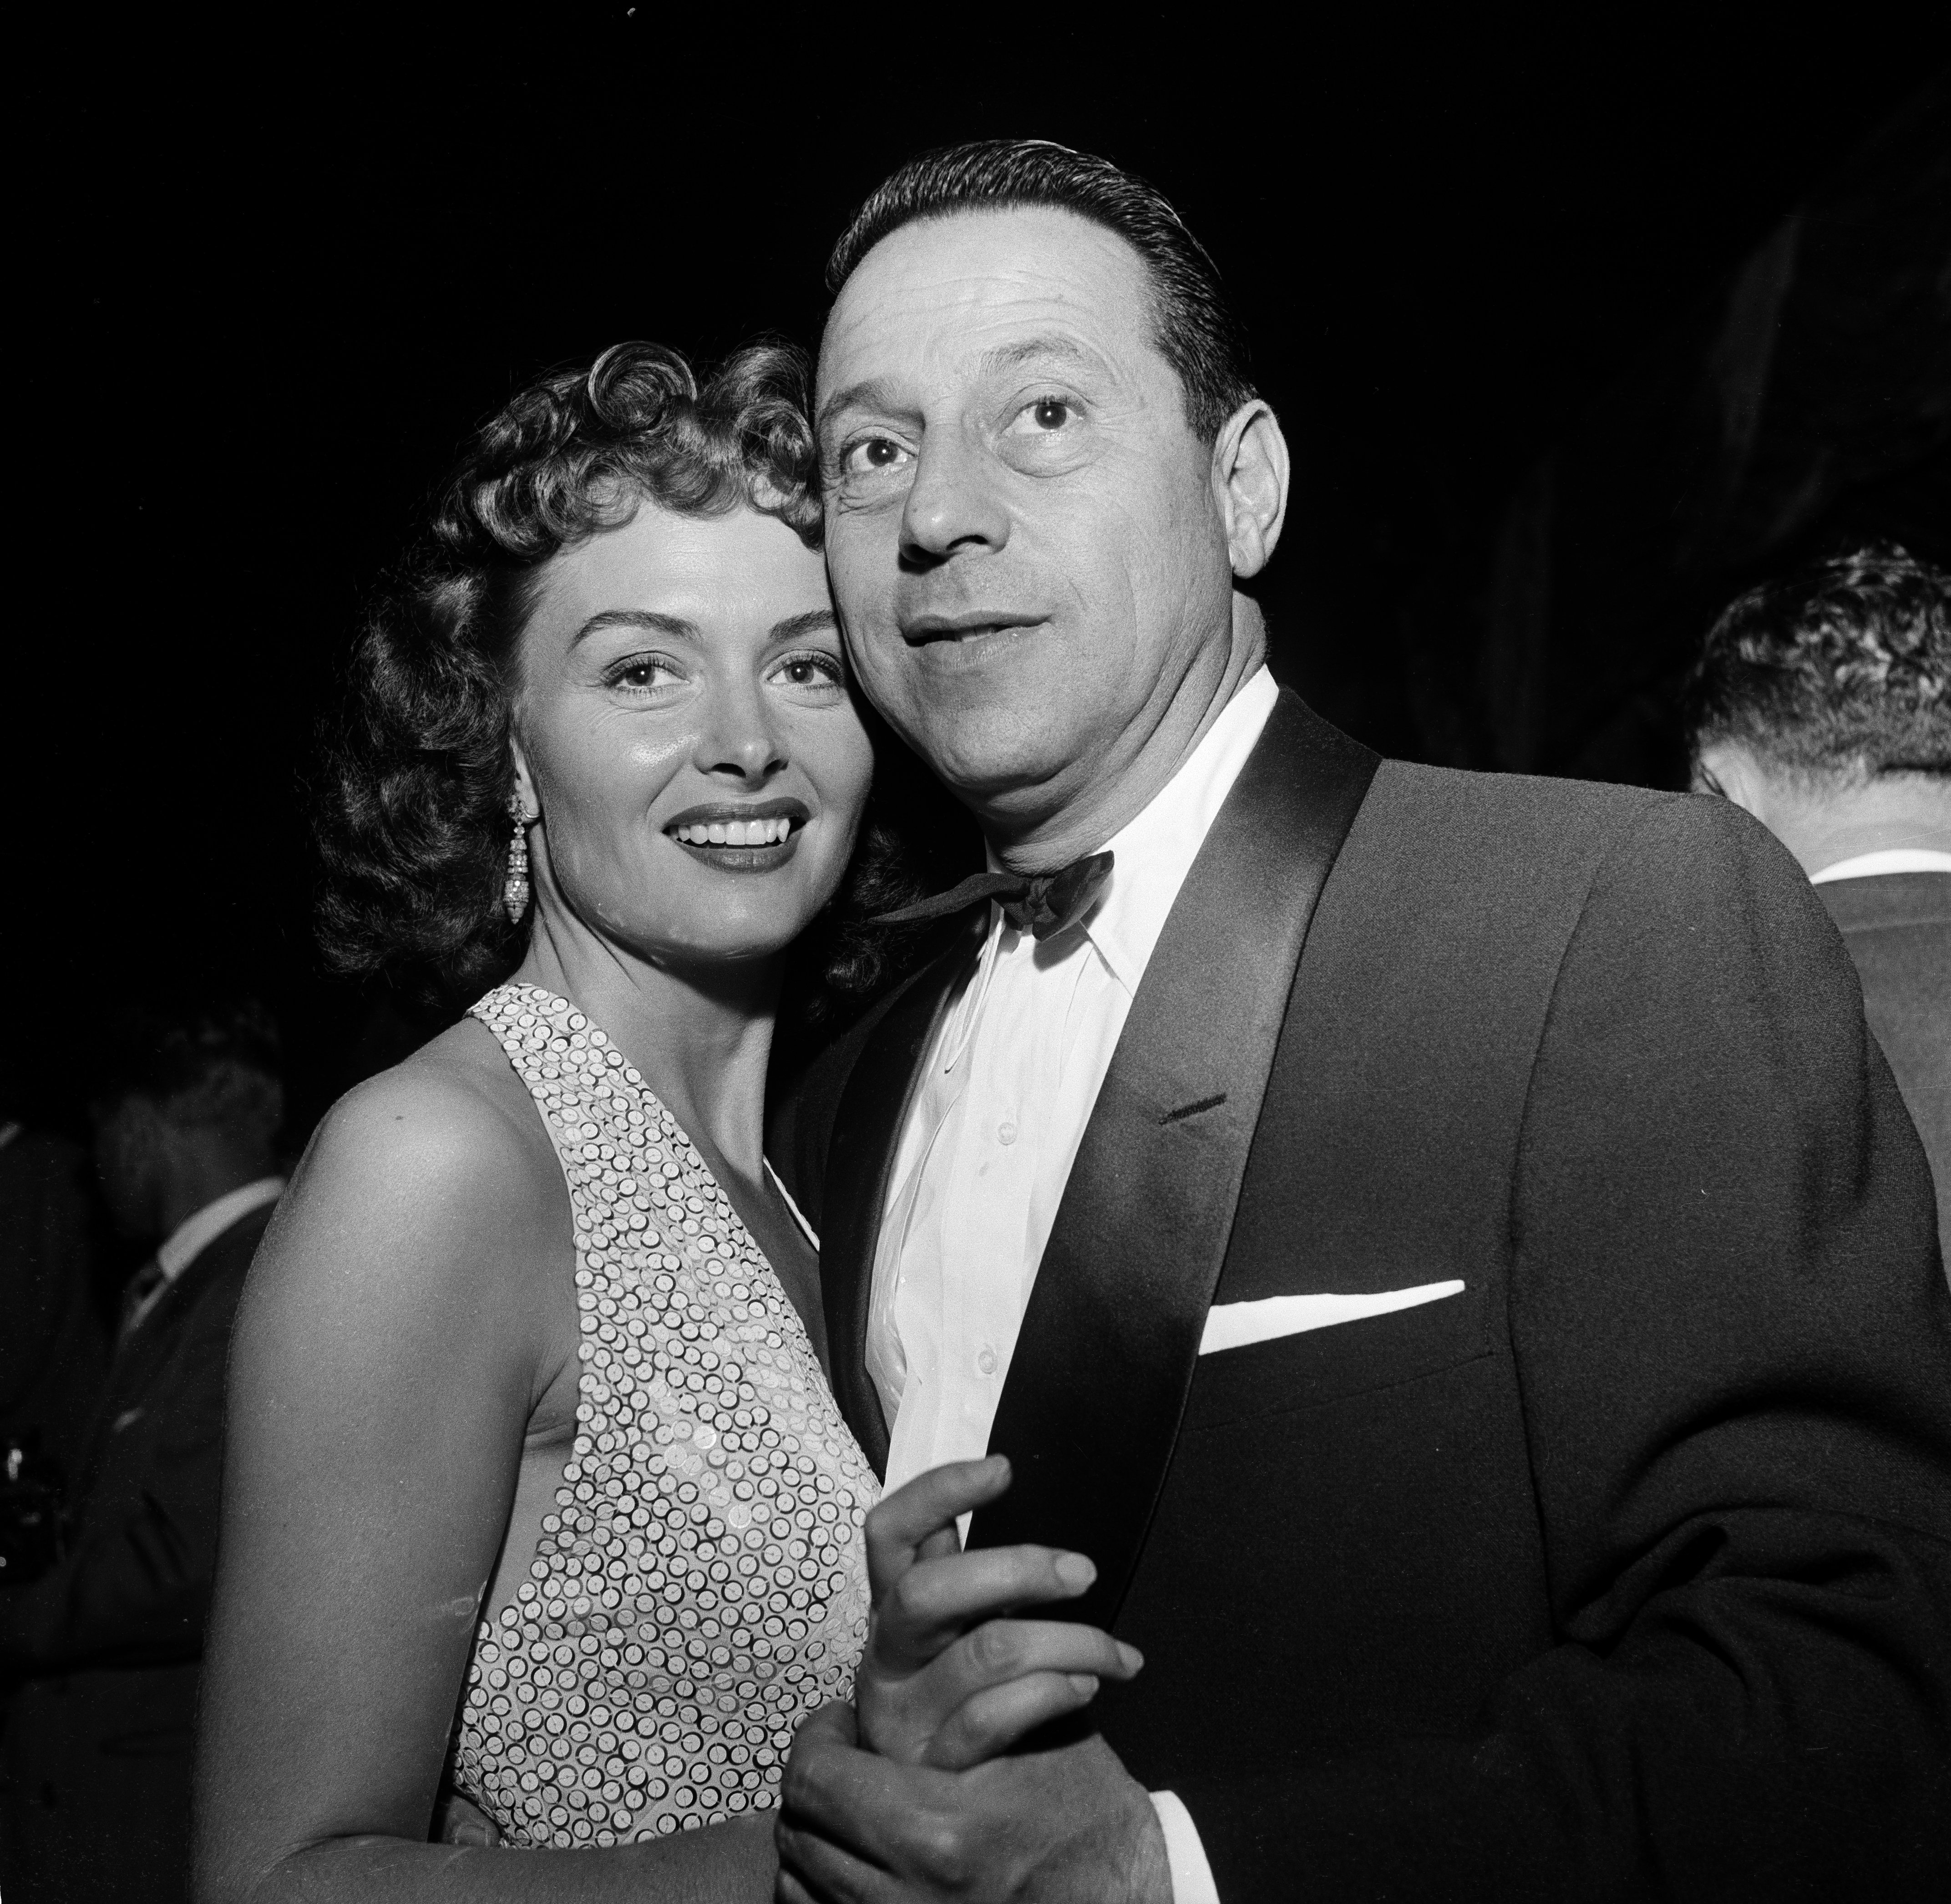 Actress Donna Reed with husband Tony Owens attend an event in Los Angeles, circa 1962 | Source: Getty Images